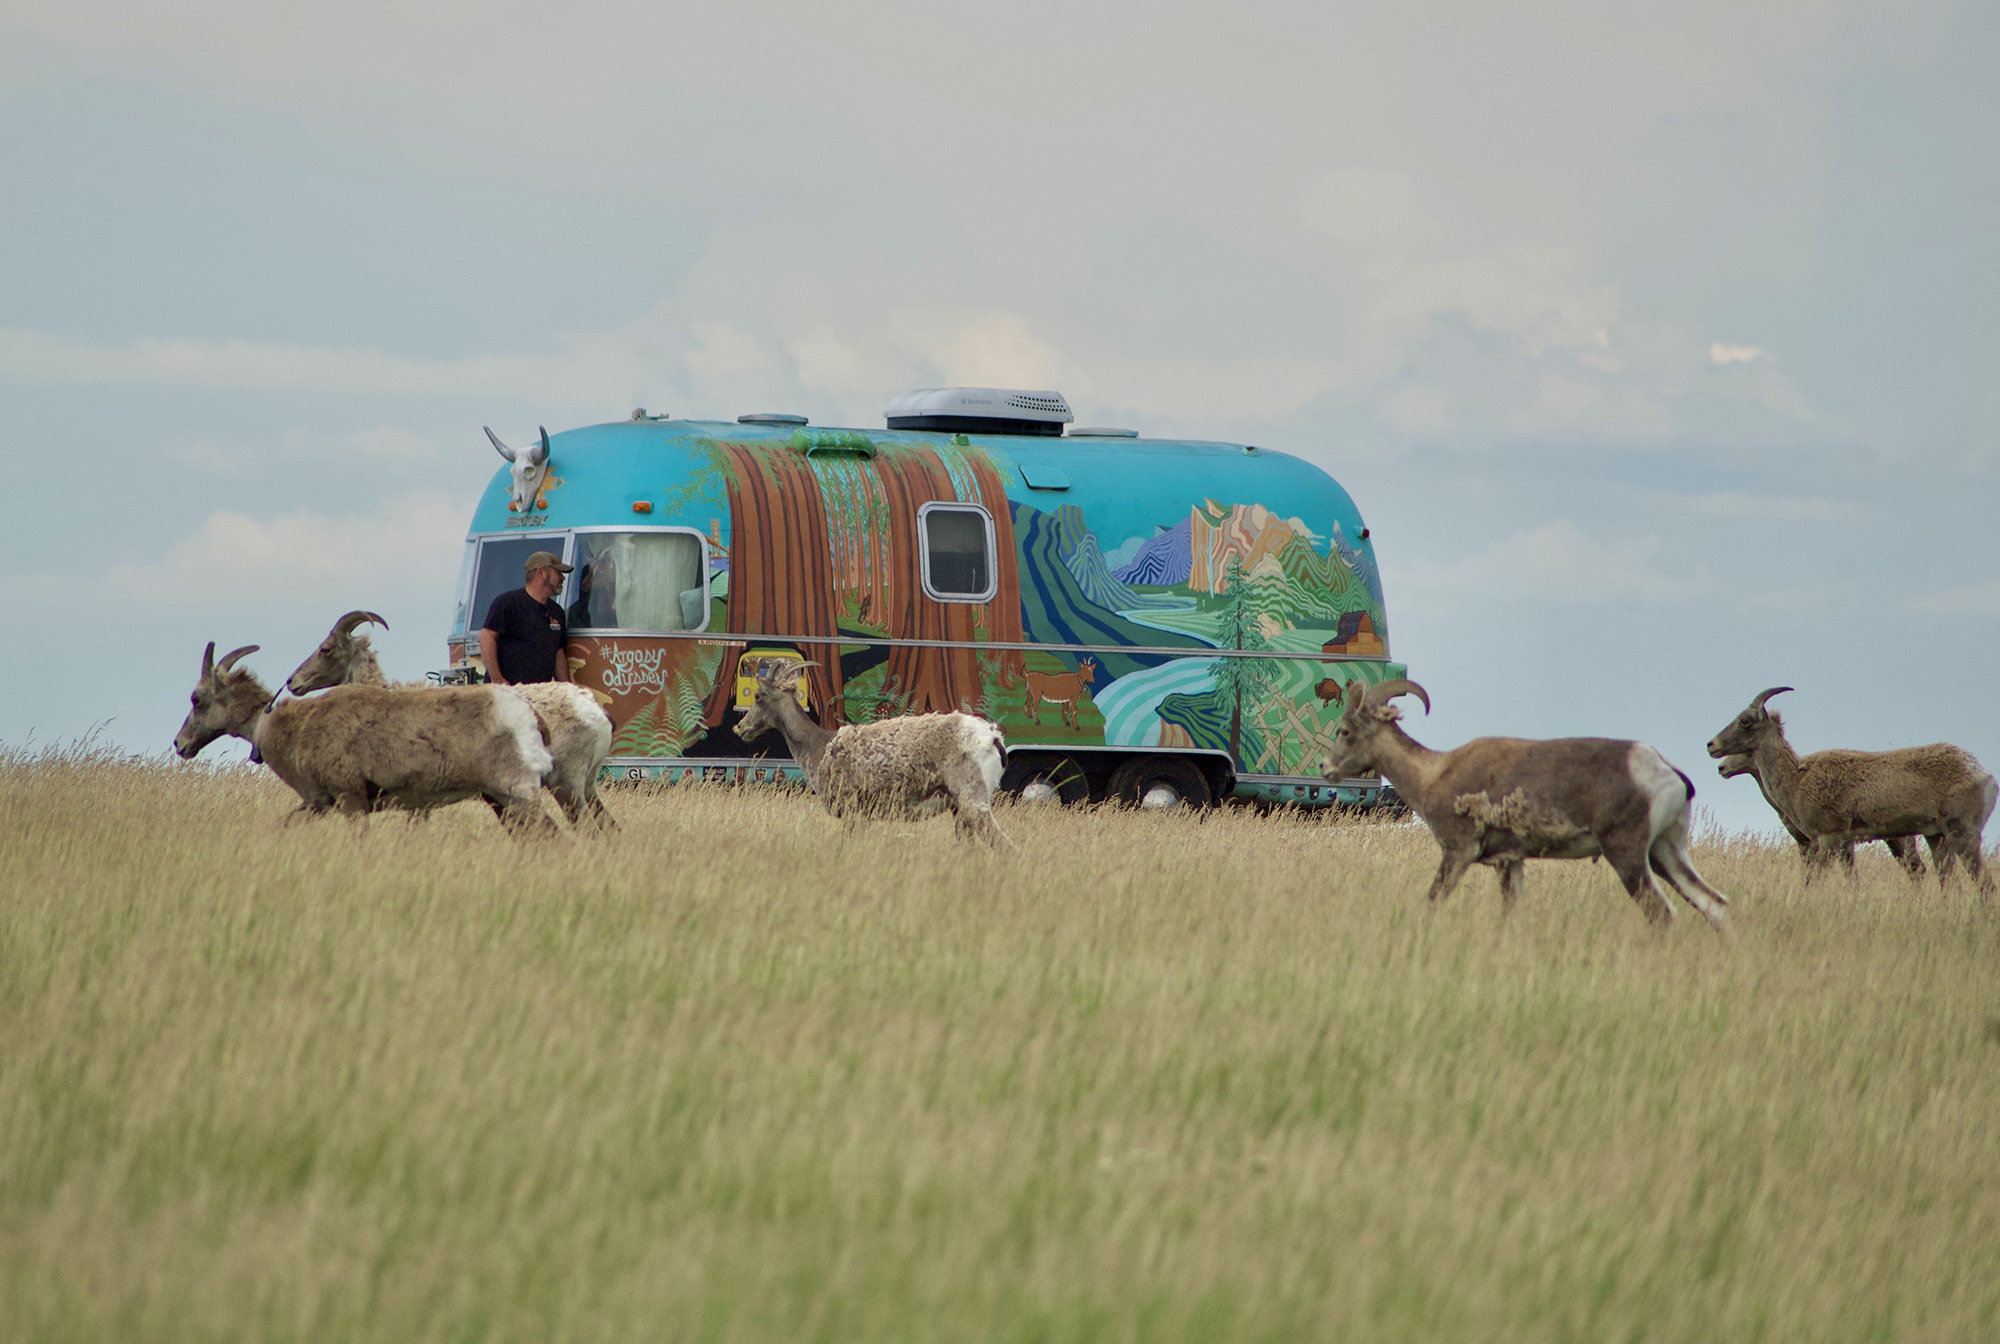 A herd of sheep walk past a colorfully painted airstream rv.